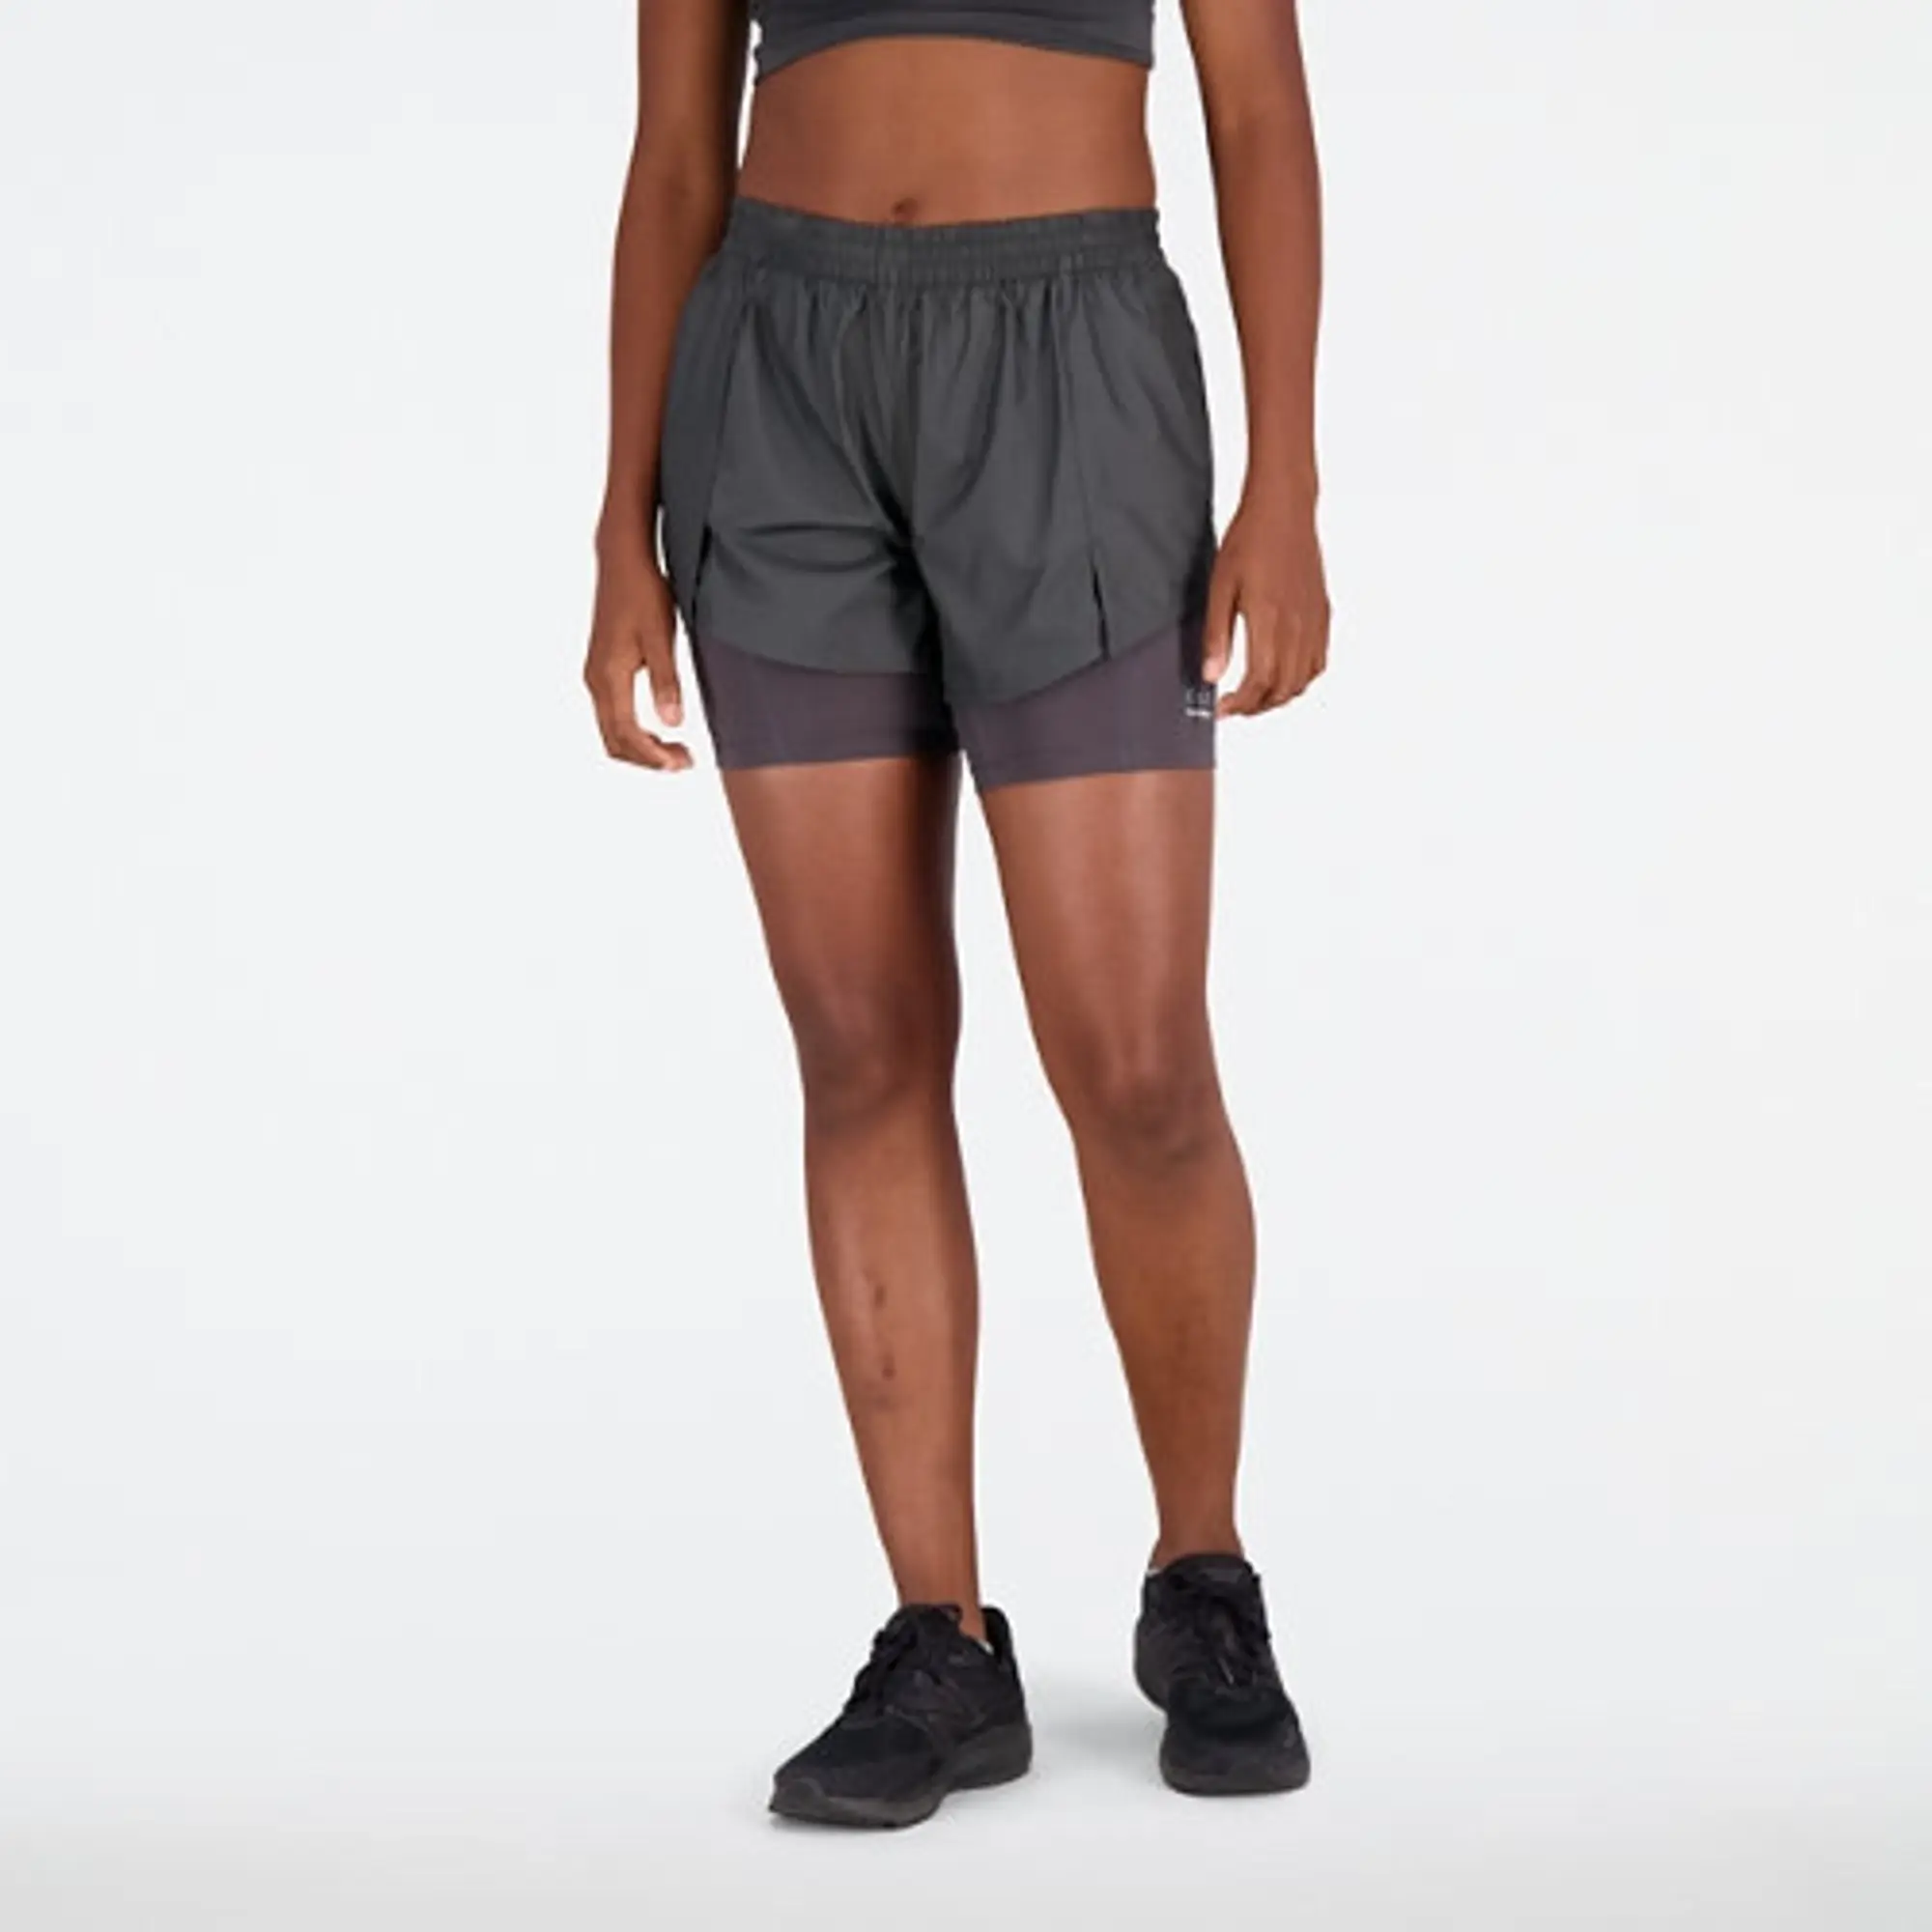 New Balance Women's Impact Run AT 3 Inch 2-in-1 Short in Black Polywoven